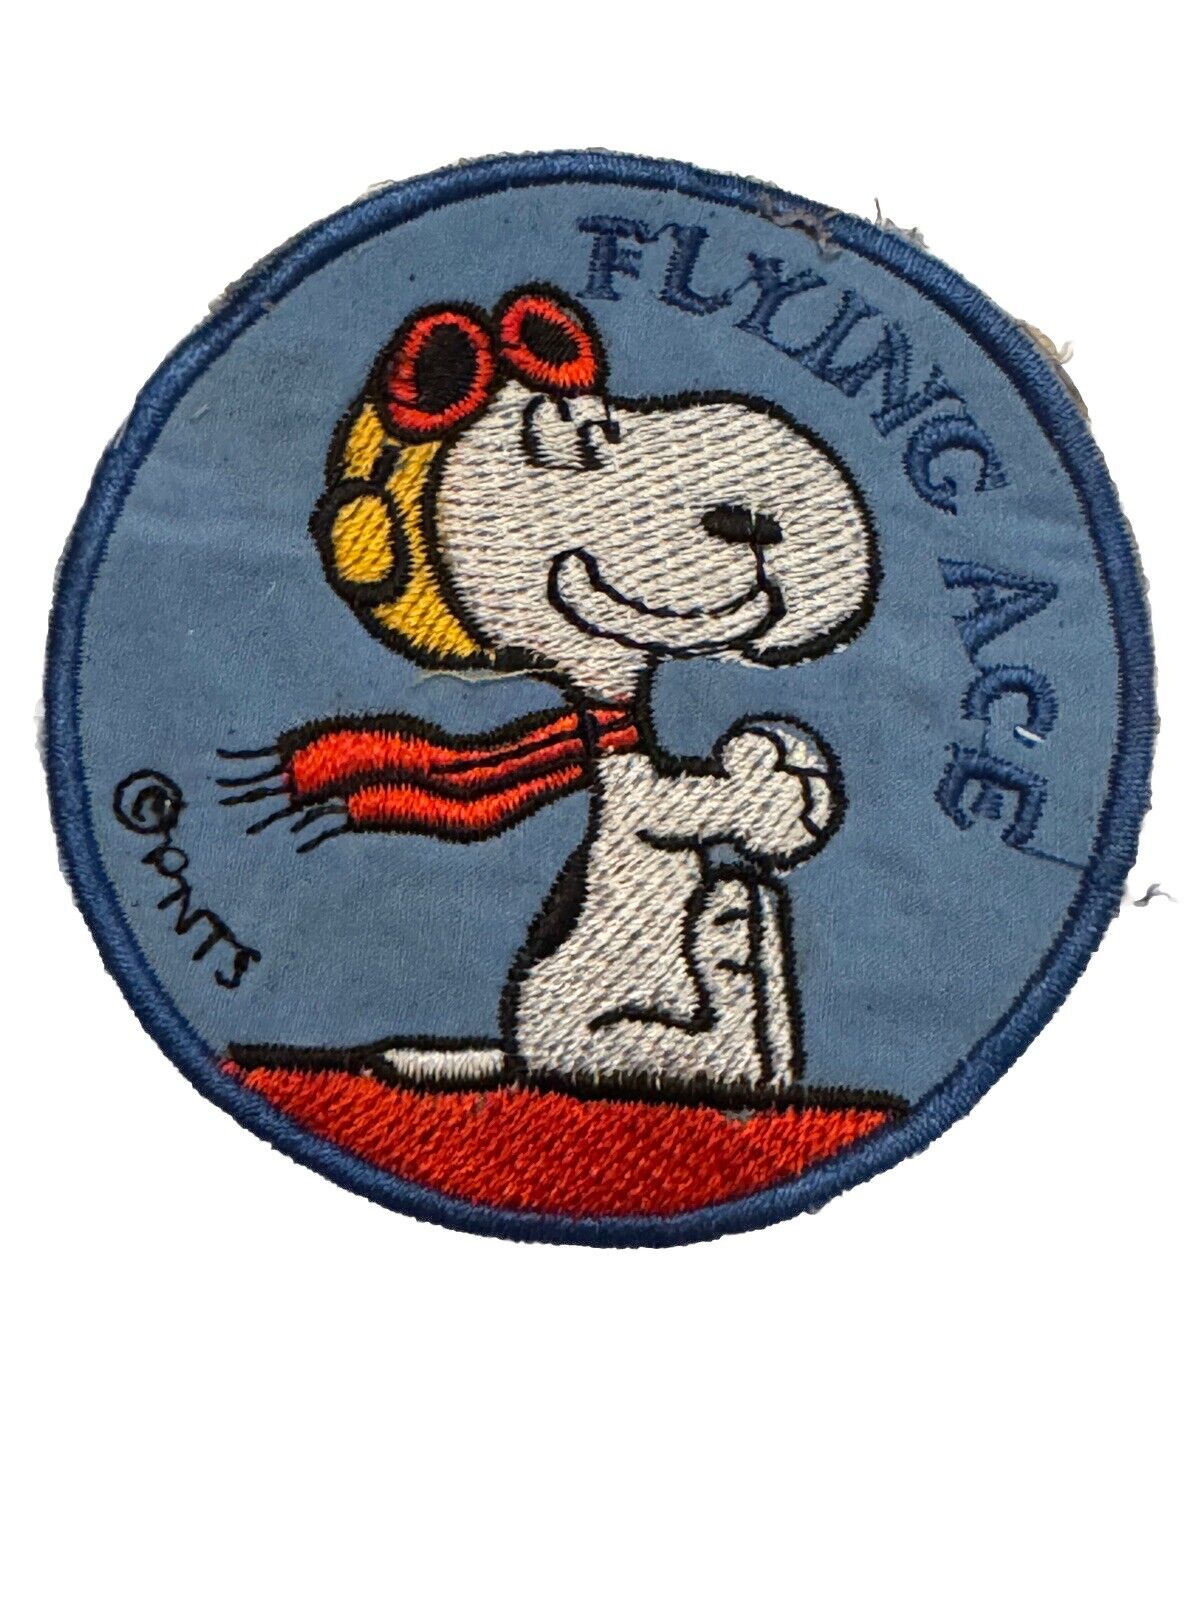 Vietnam War Patch USAF Snoopy OPS Flying Ace 20th TASS Military Badge Vintage